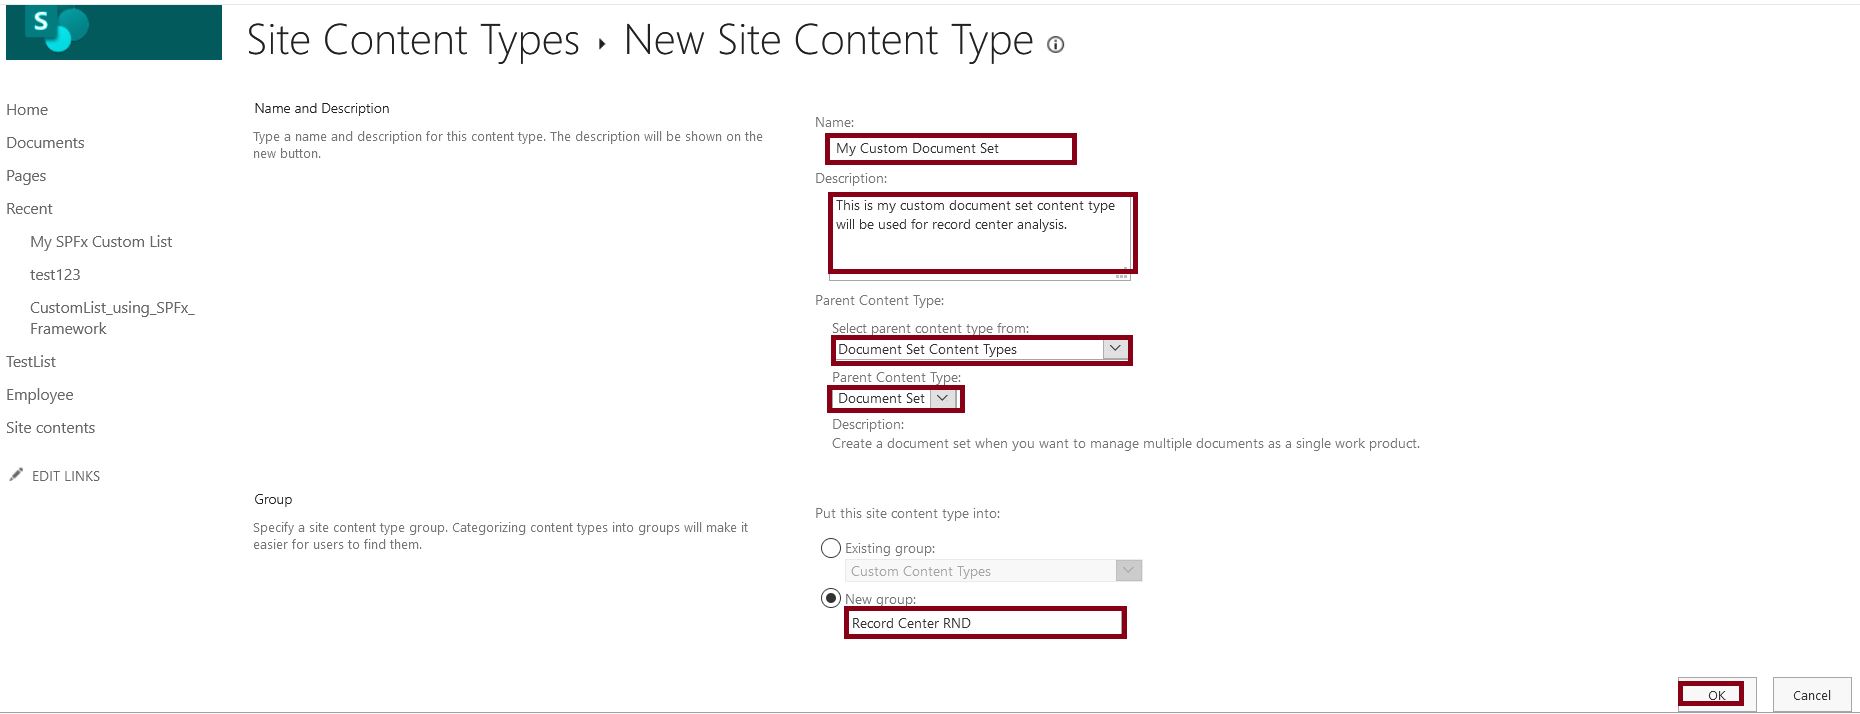 Create document set content type in SharePoint Online